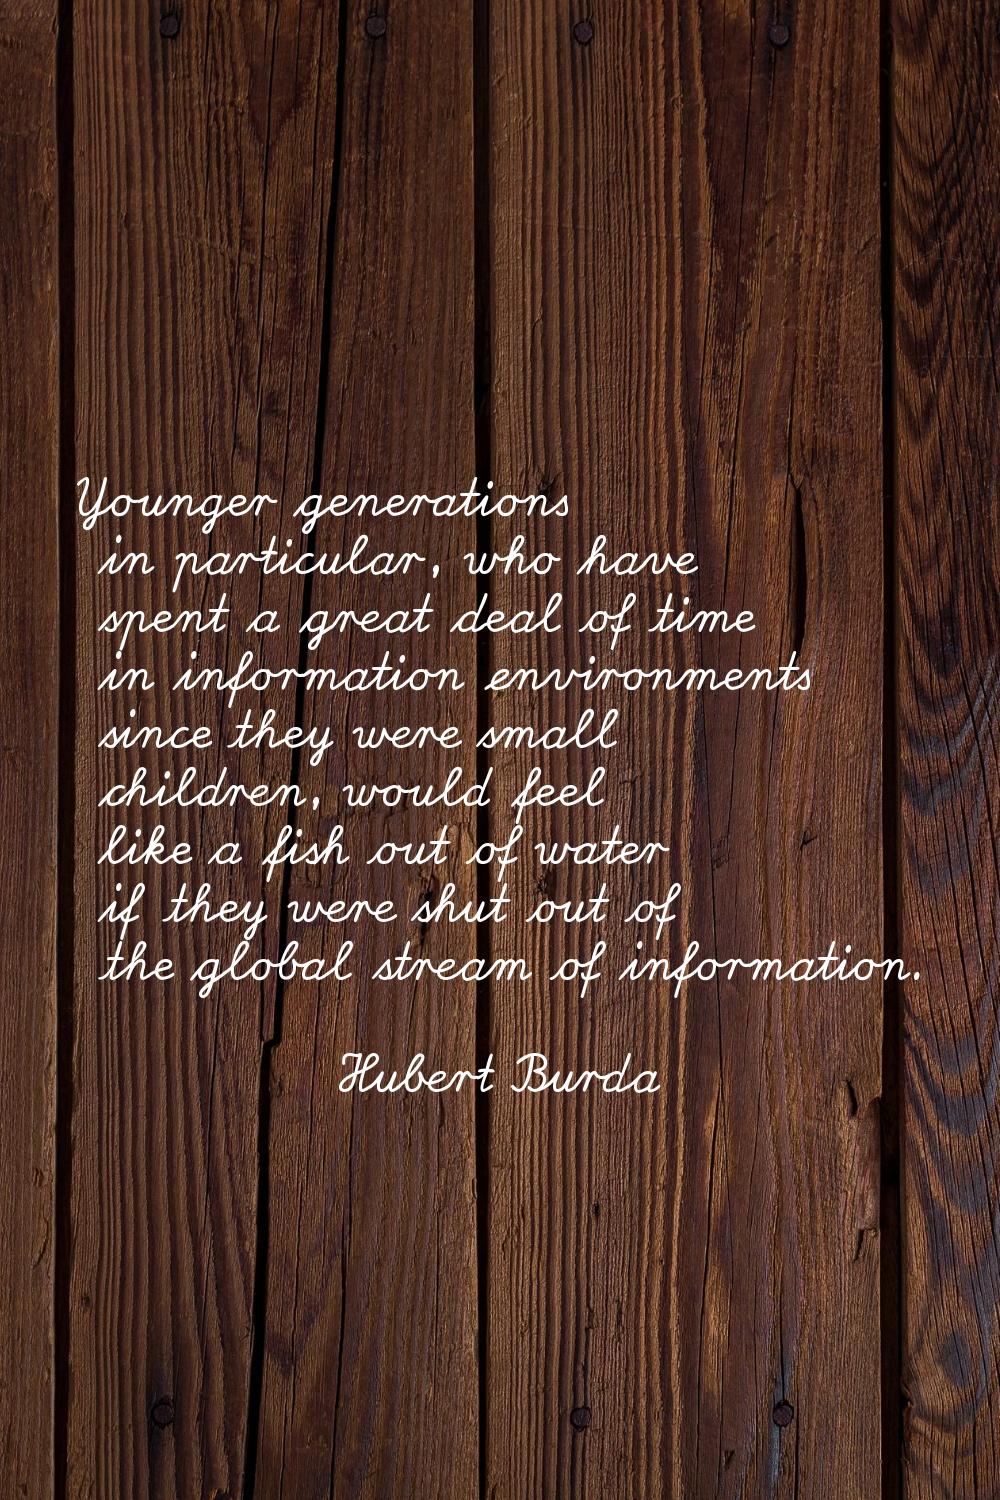 Younger generations in particular, who have spent a great deal of time in information environments 